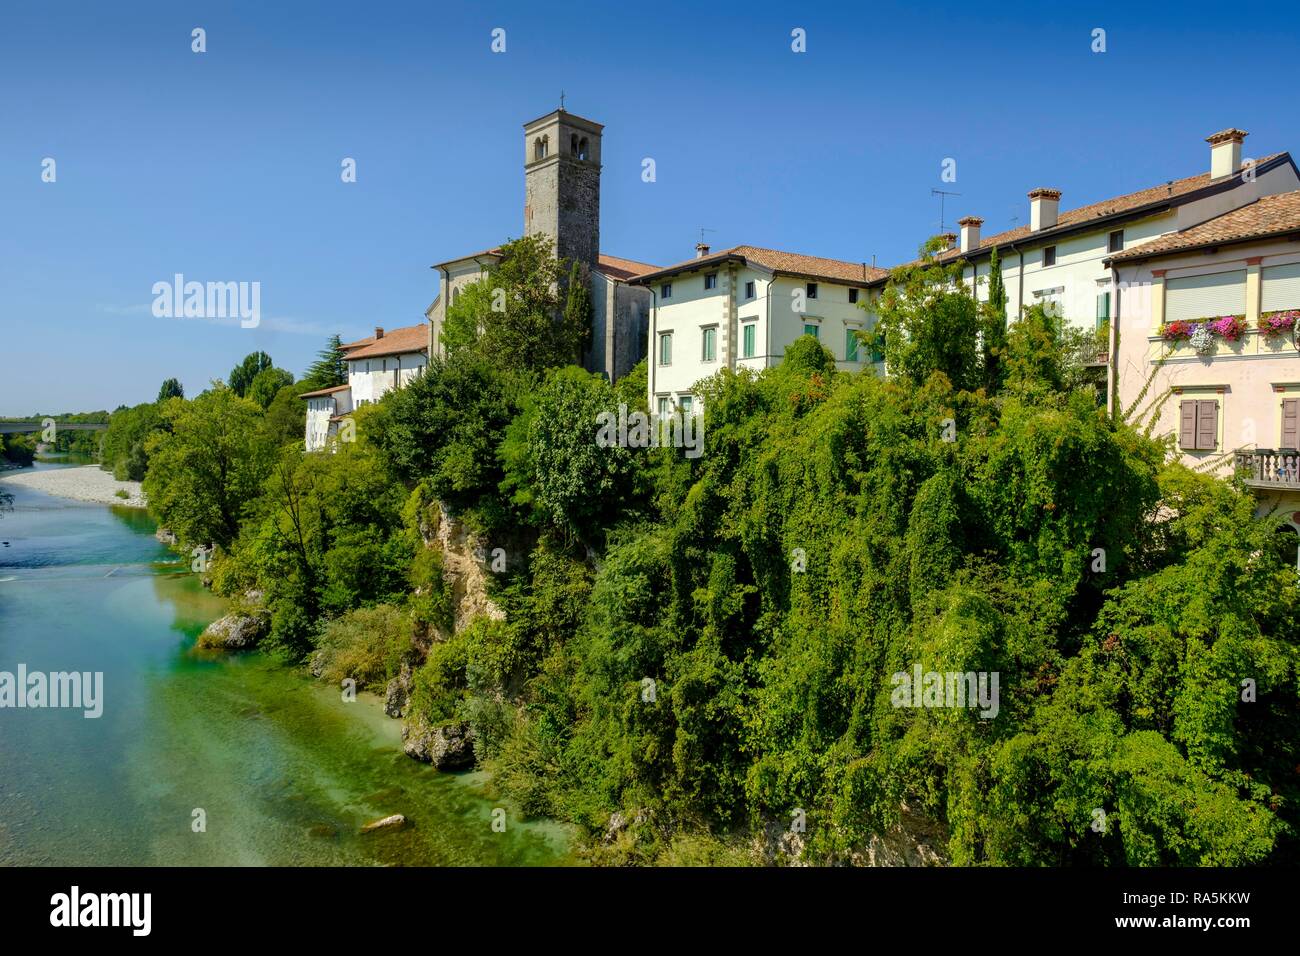 View over the river Natisone to the Campanile of the cathedral Santa Maria Assunta and the old town, Cividale del Friuli Stock Photo